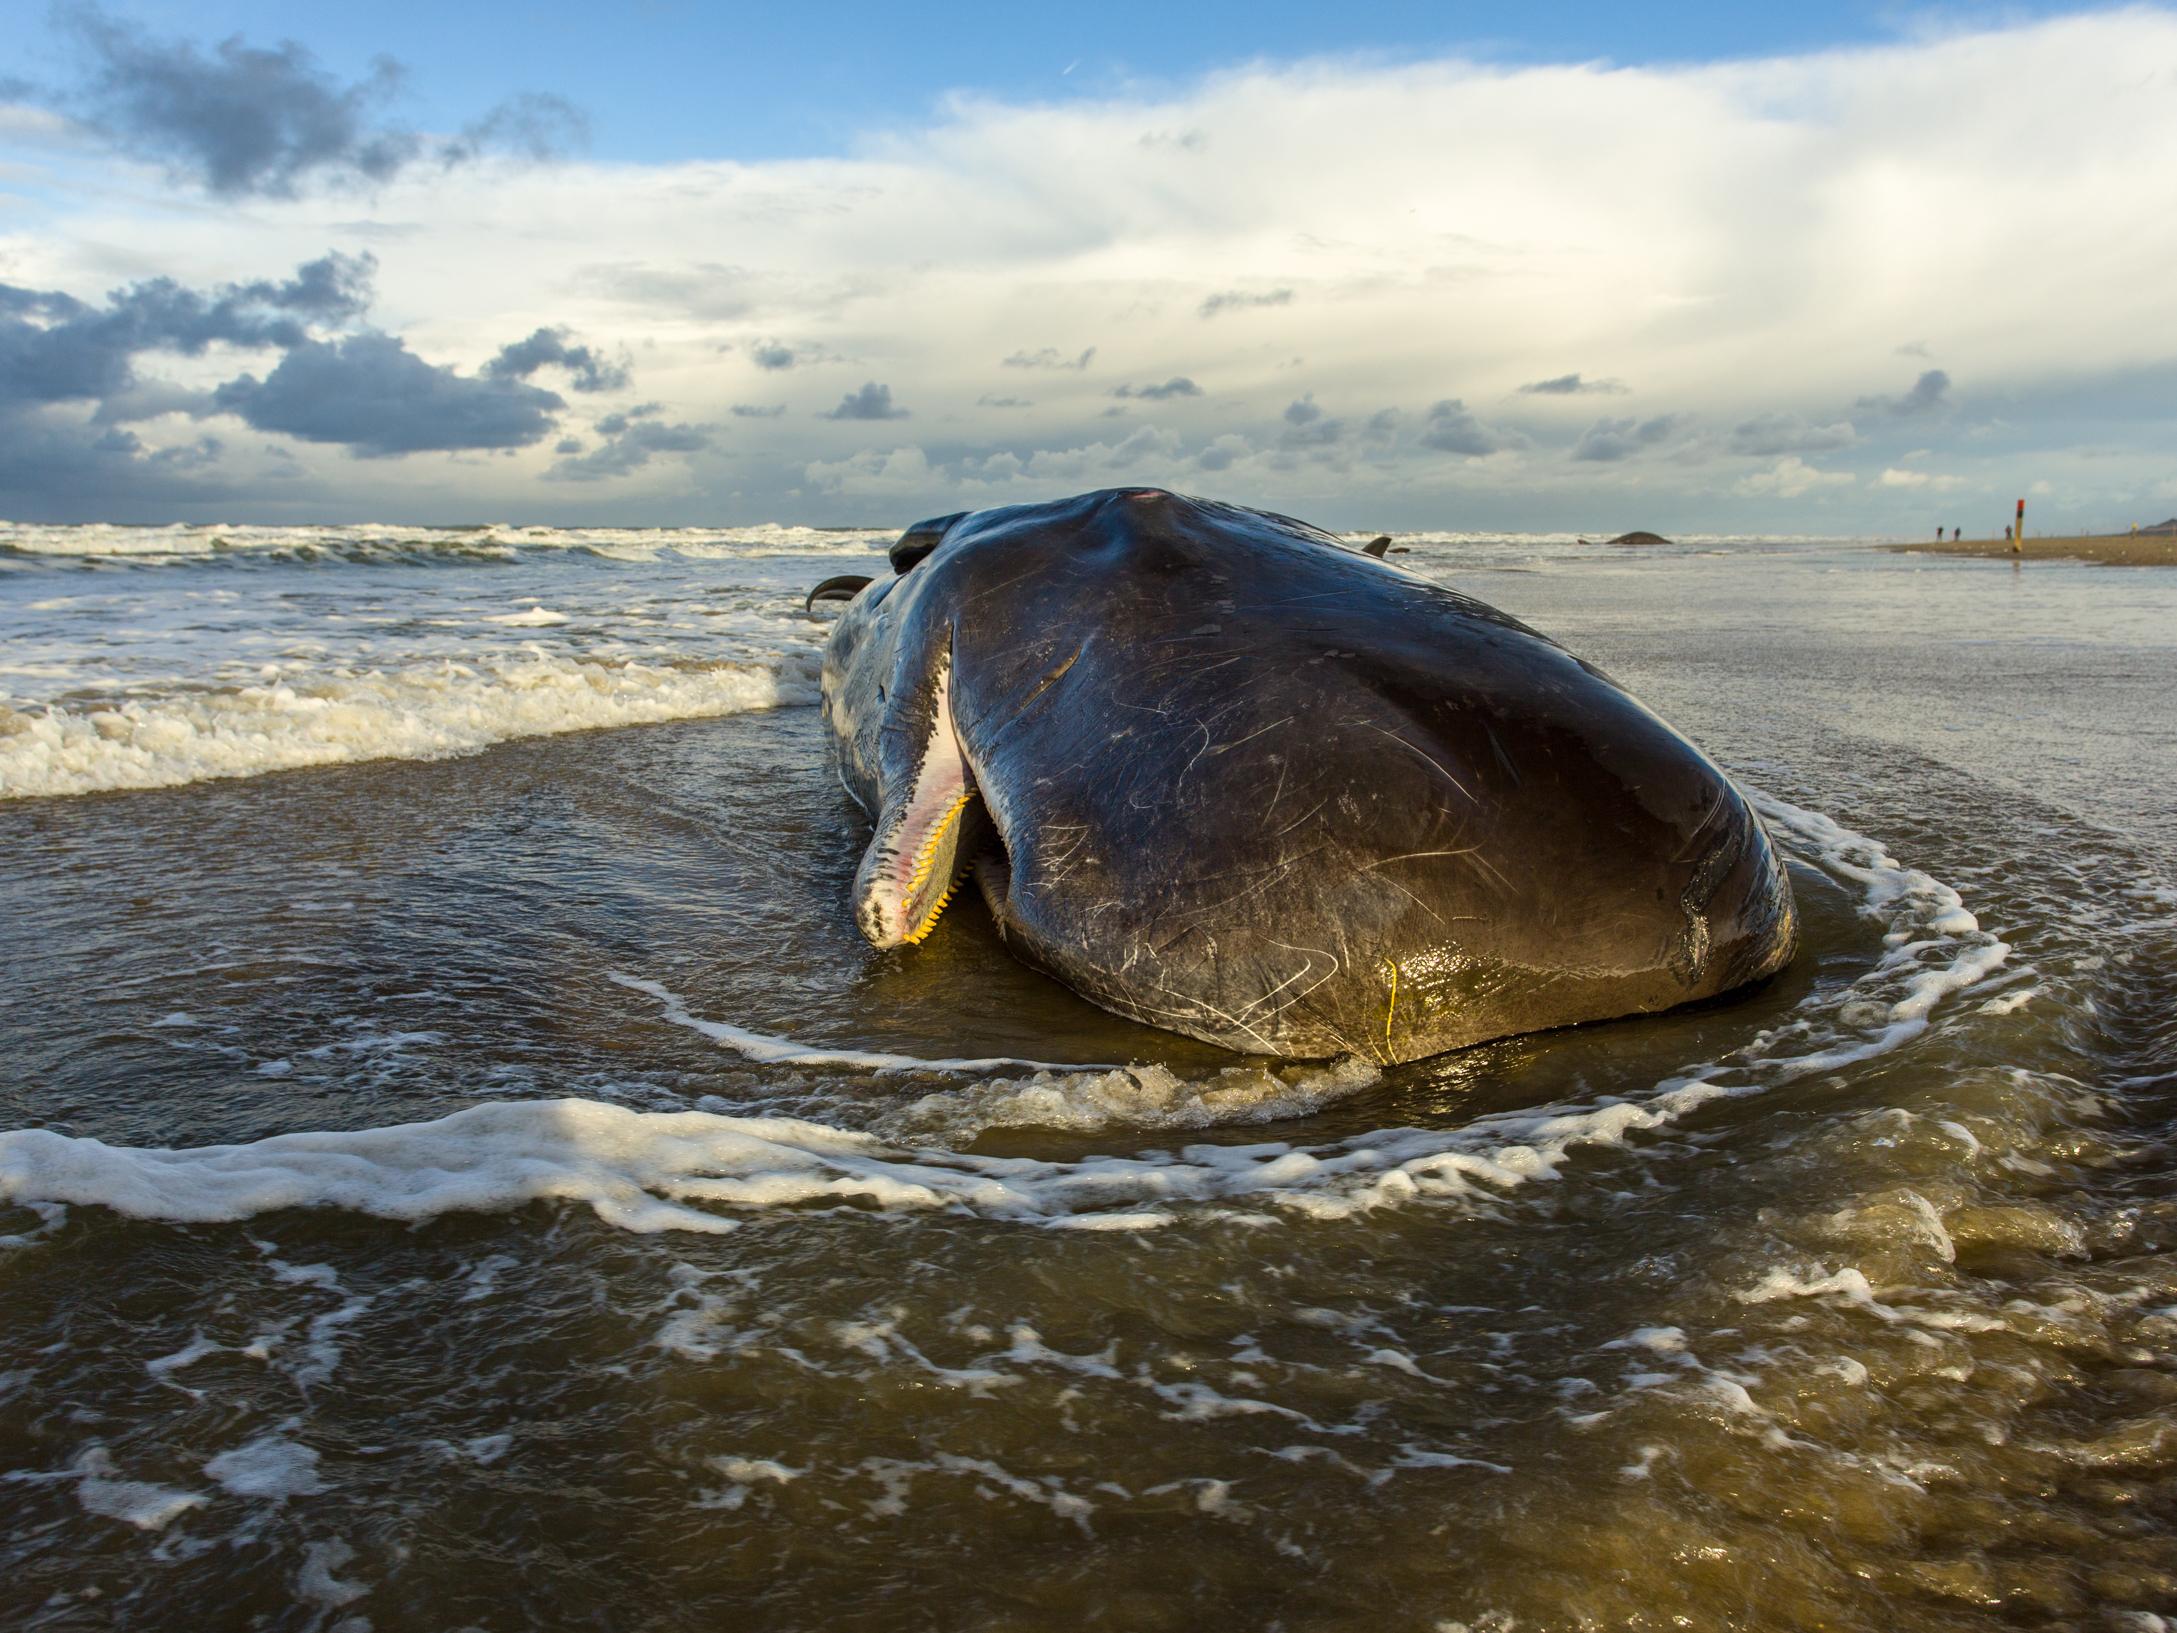 Thirty of the 77 dead whales that have beached along the Pacific Coast this year have come ashore in Washington